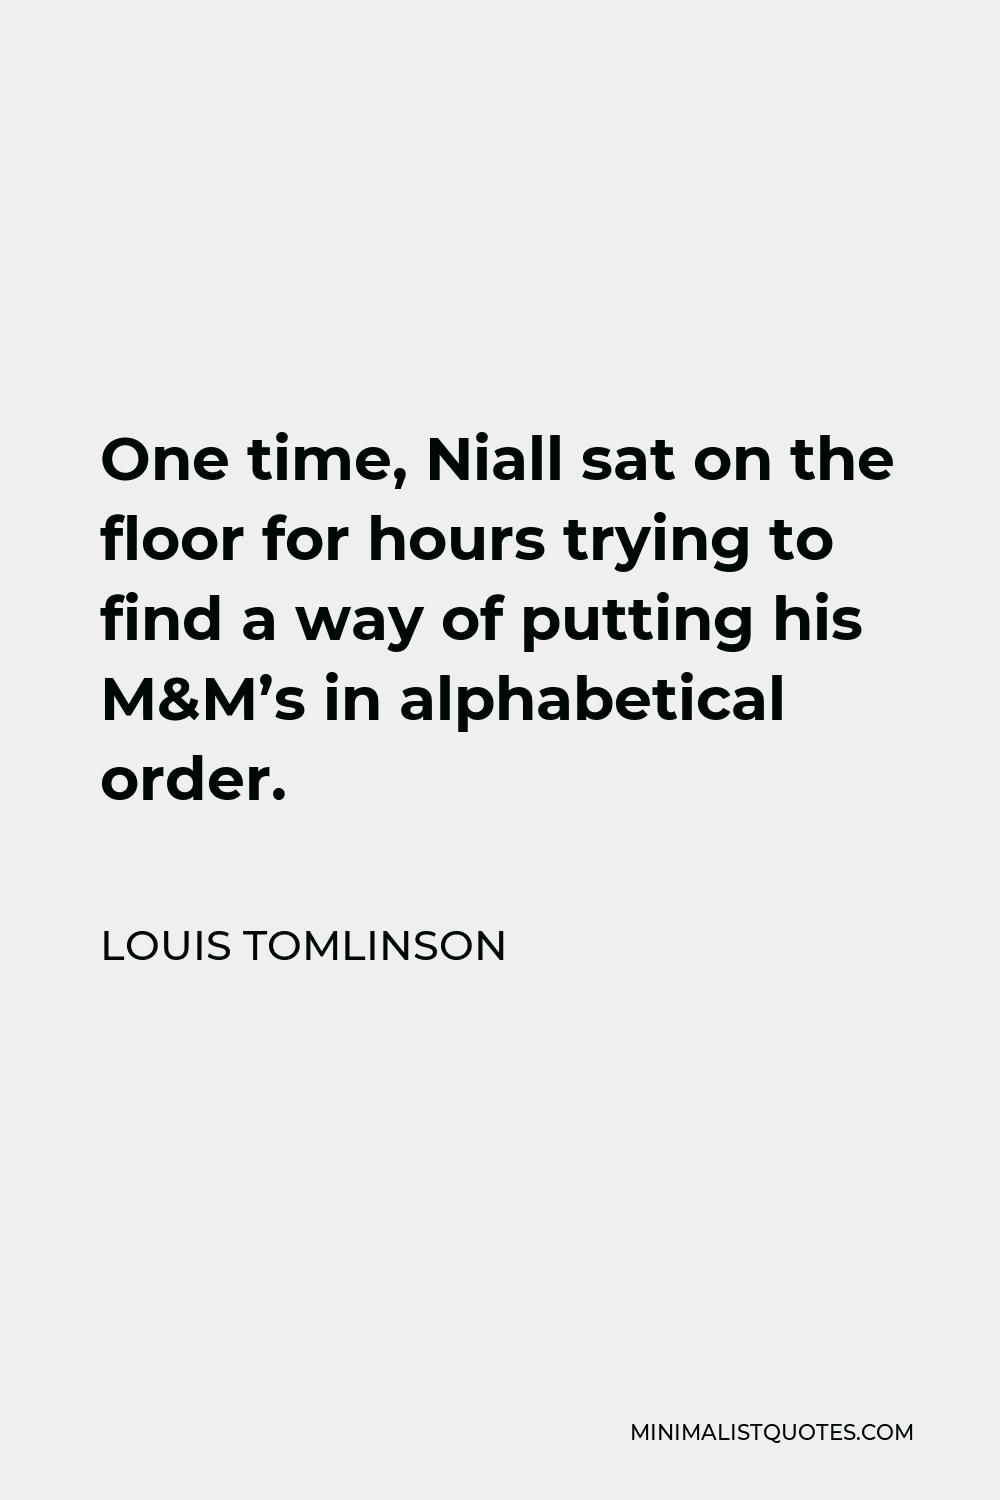 Louis Tomlinson Quote - One time, Niall sat on the floor for hours trying to find a way of putting his M&M’s in alphabetical order.